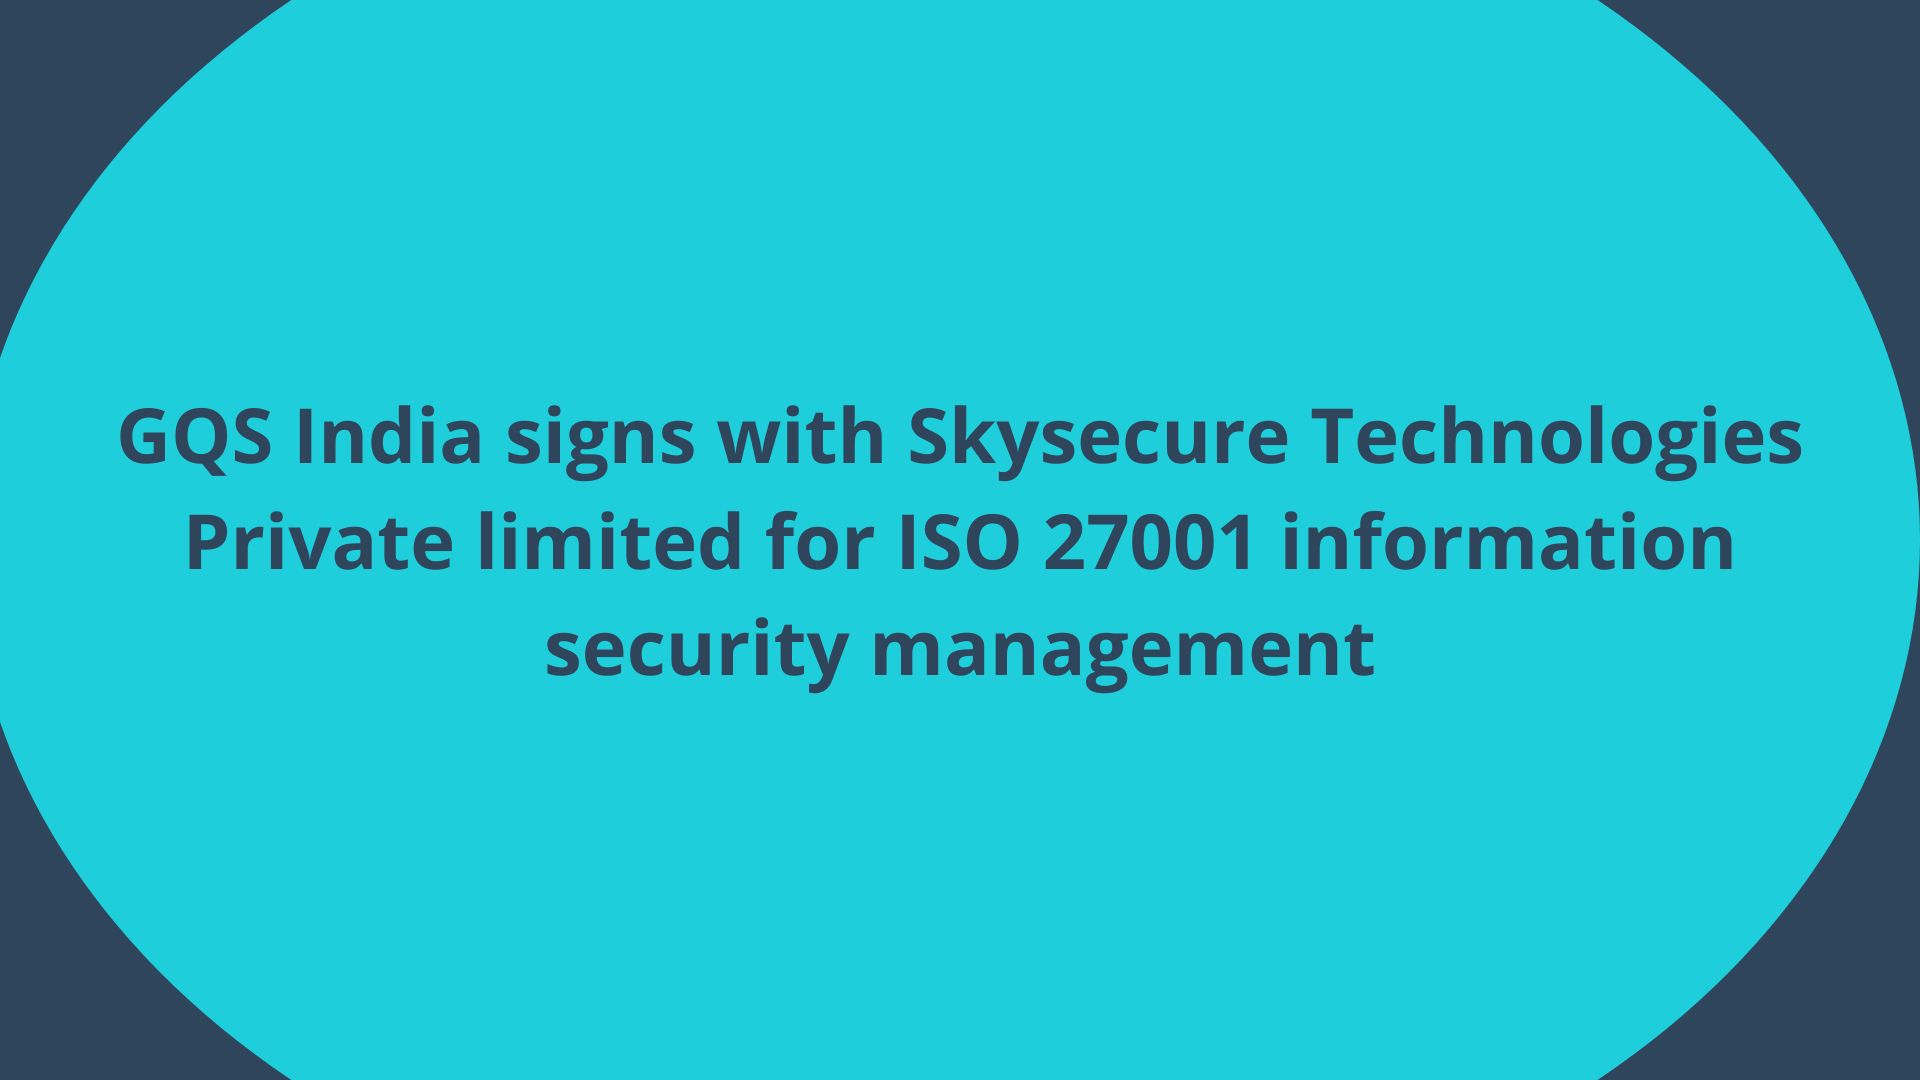 GQS India signs with Skysecure Technologies Private limited for ISO 27001 information security management